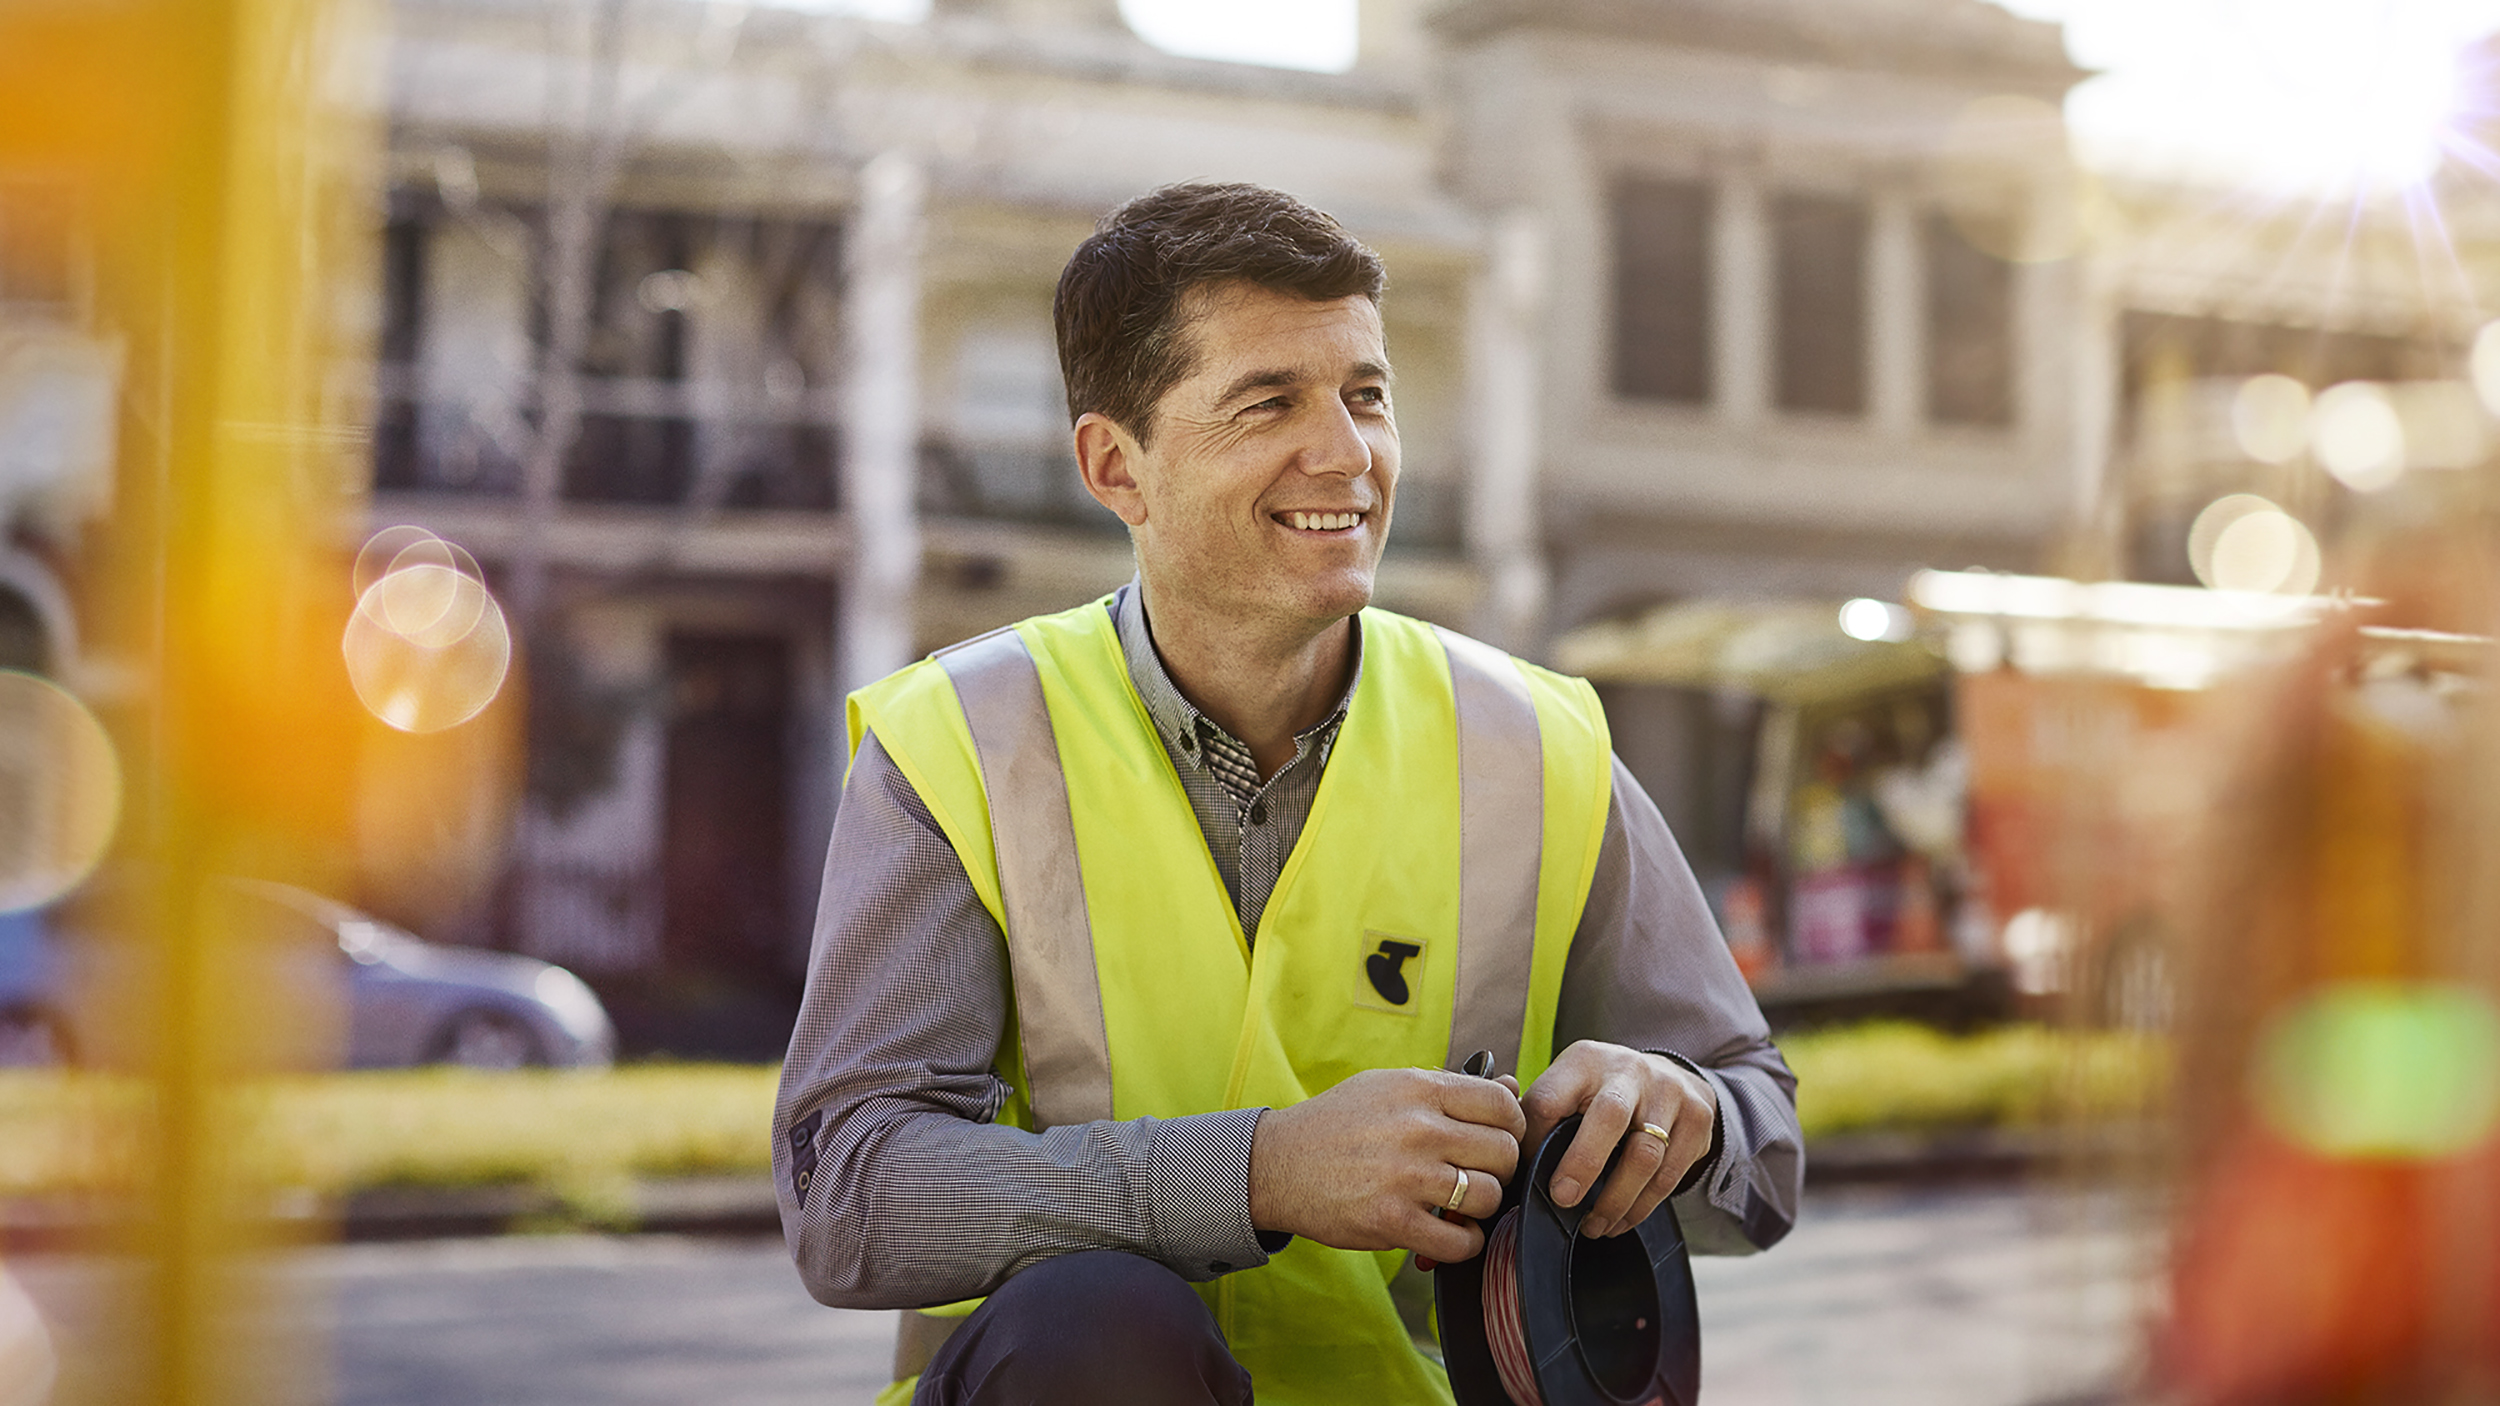 telecommunications-campaign-thom-rigney-professional-photographer-advertising-telstra-candid-001